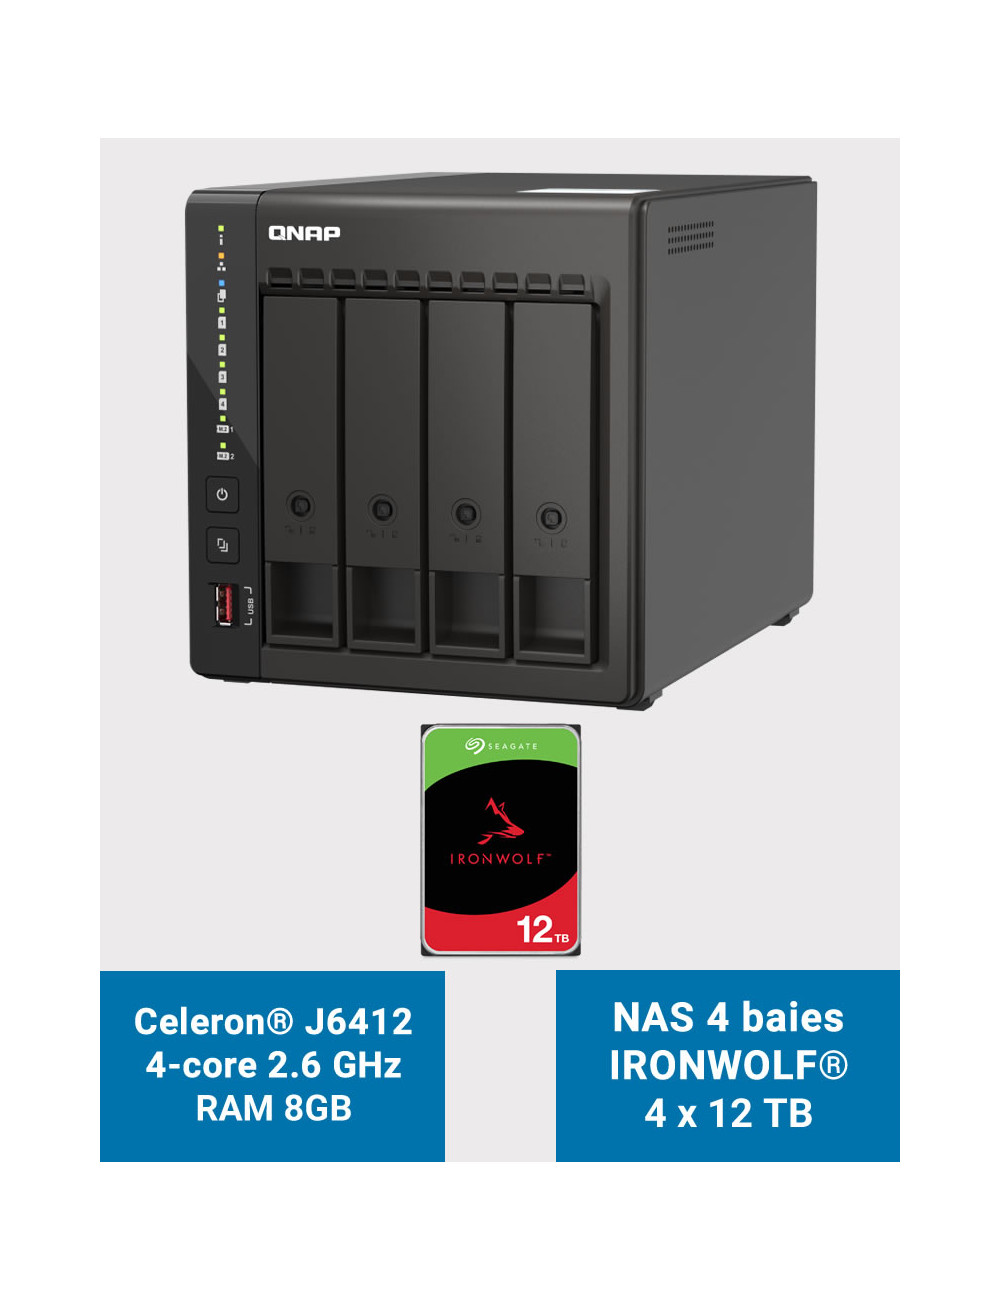 QNAP TS-453E 8GB Serveur NAS 4 baies IRONWOLF 48To (4x12To)